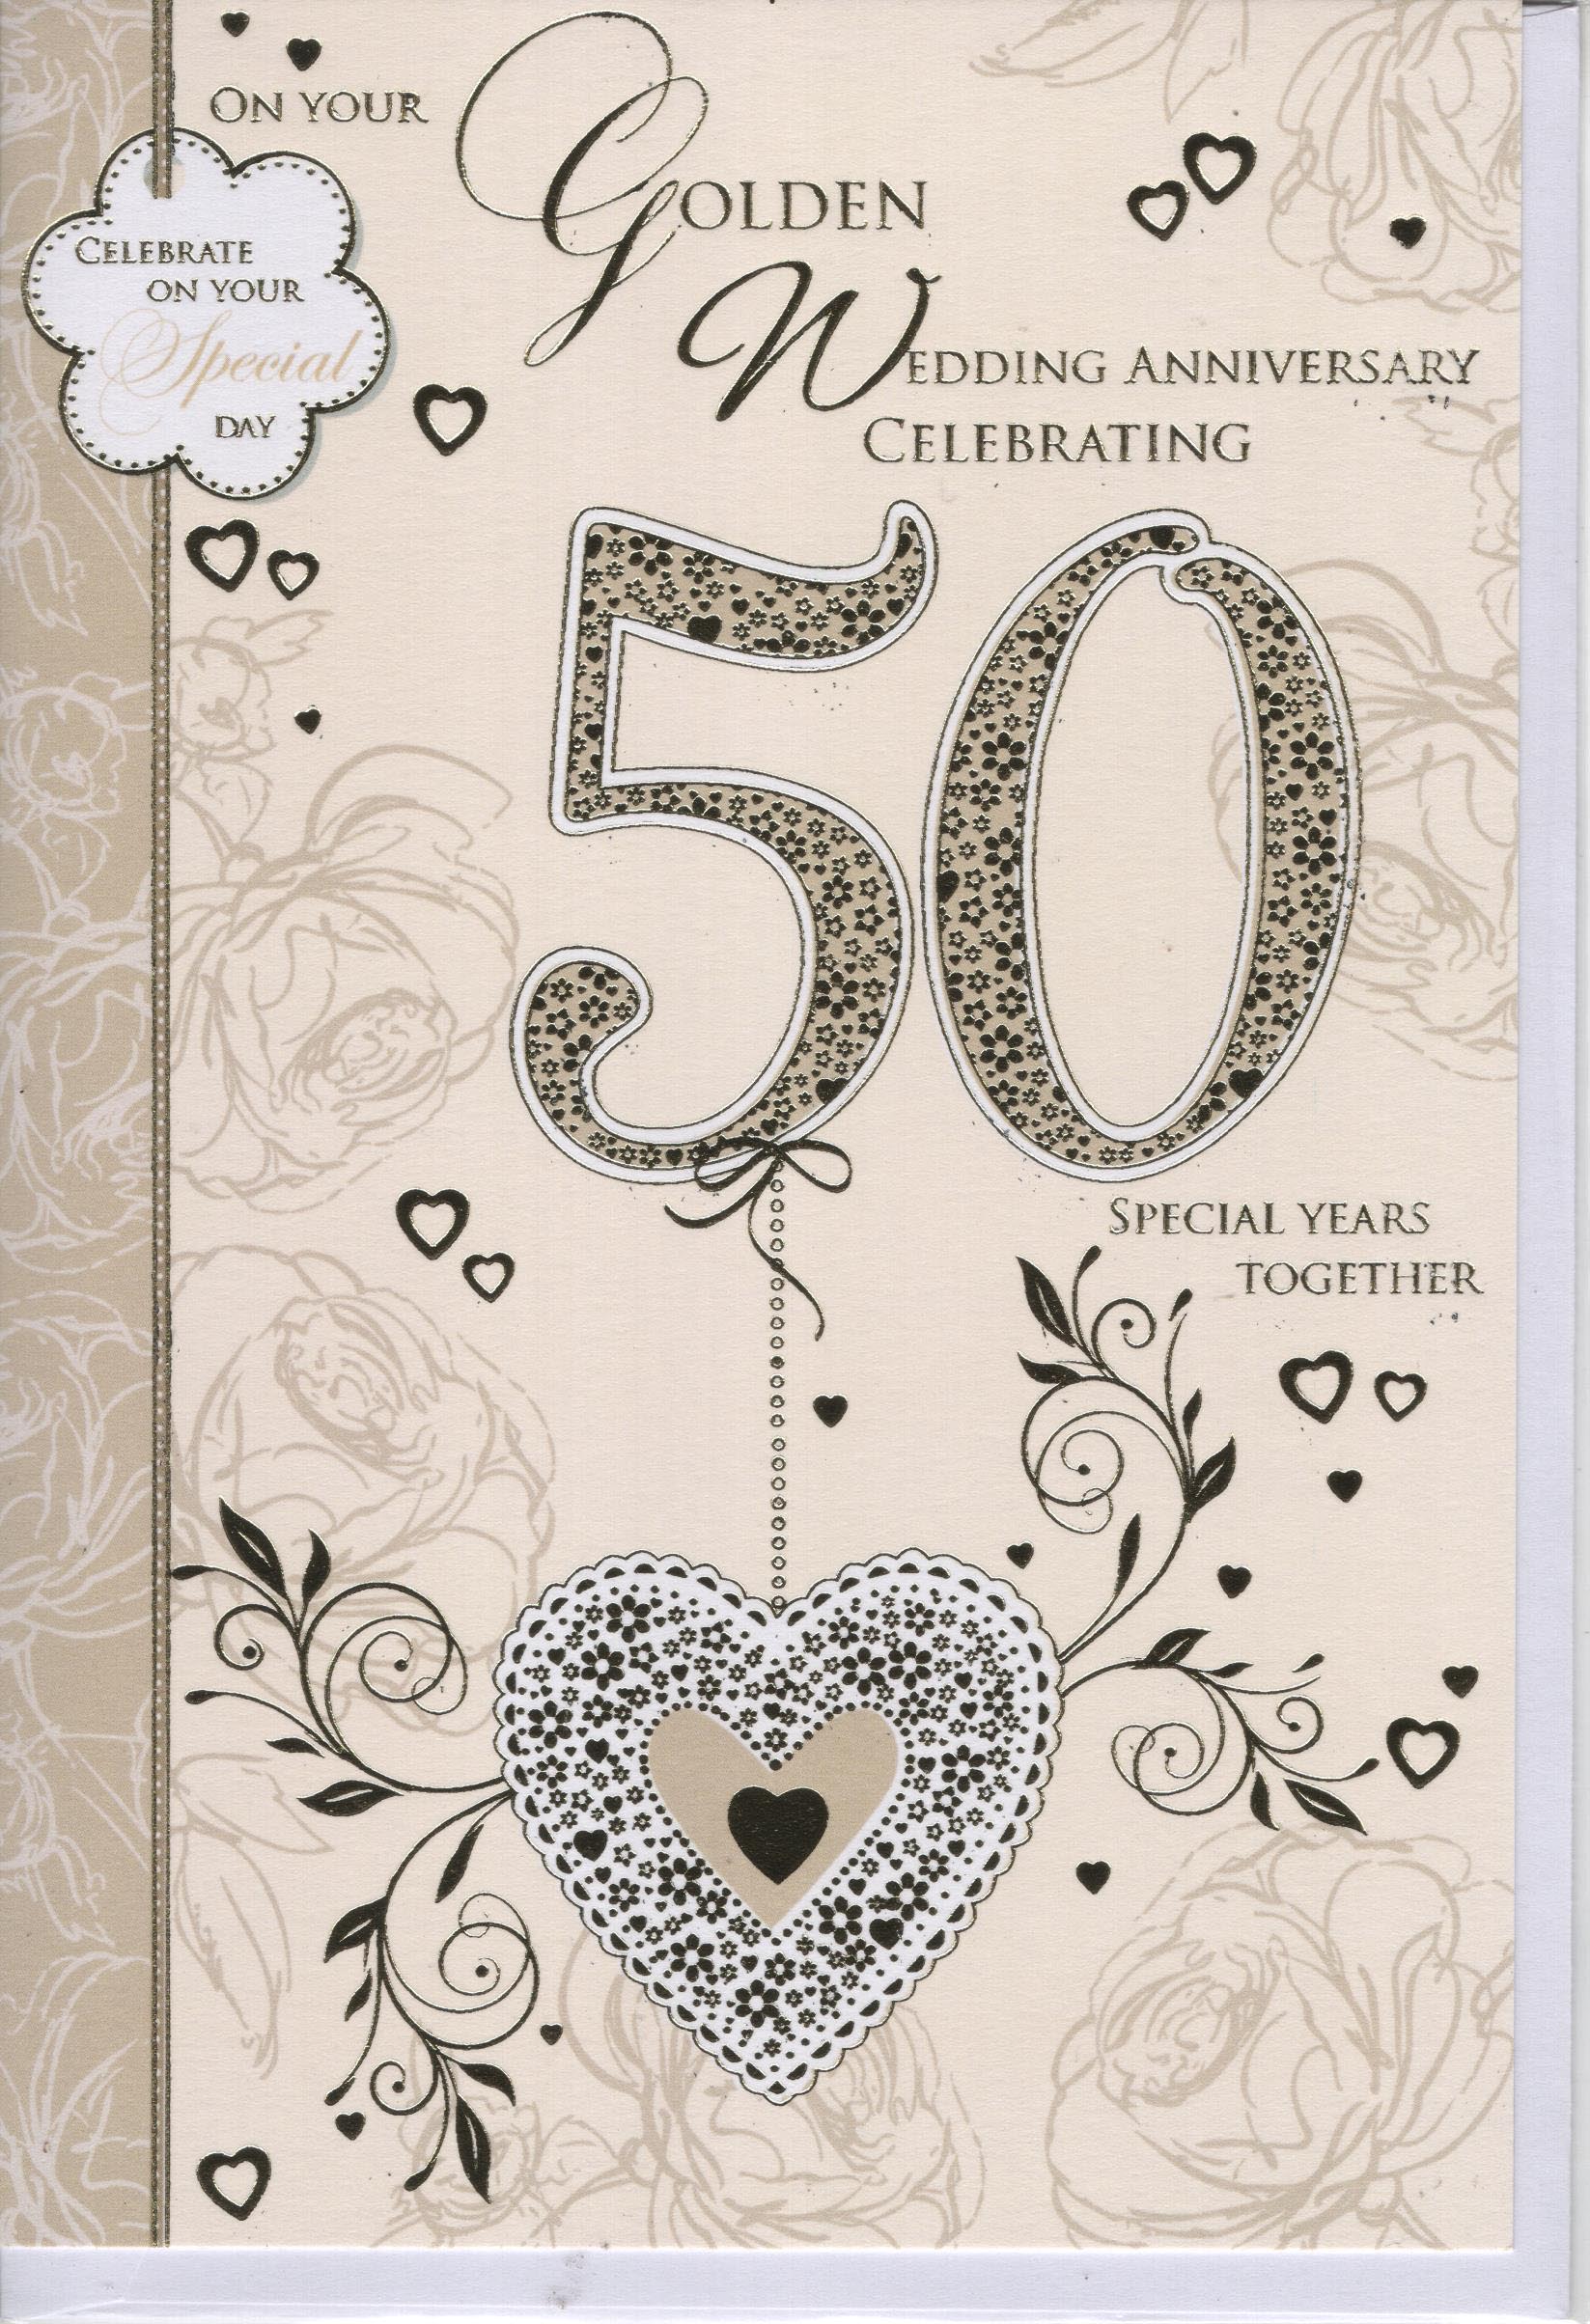 On Your Golden Wedding Anniversary Celebrating 50 Special Years Together